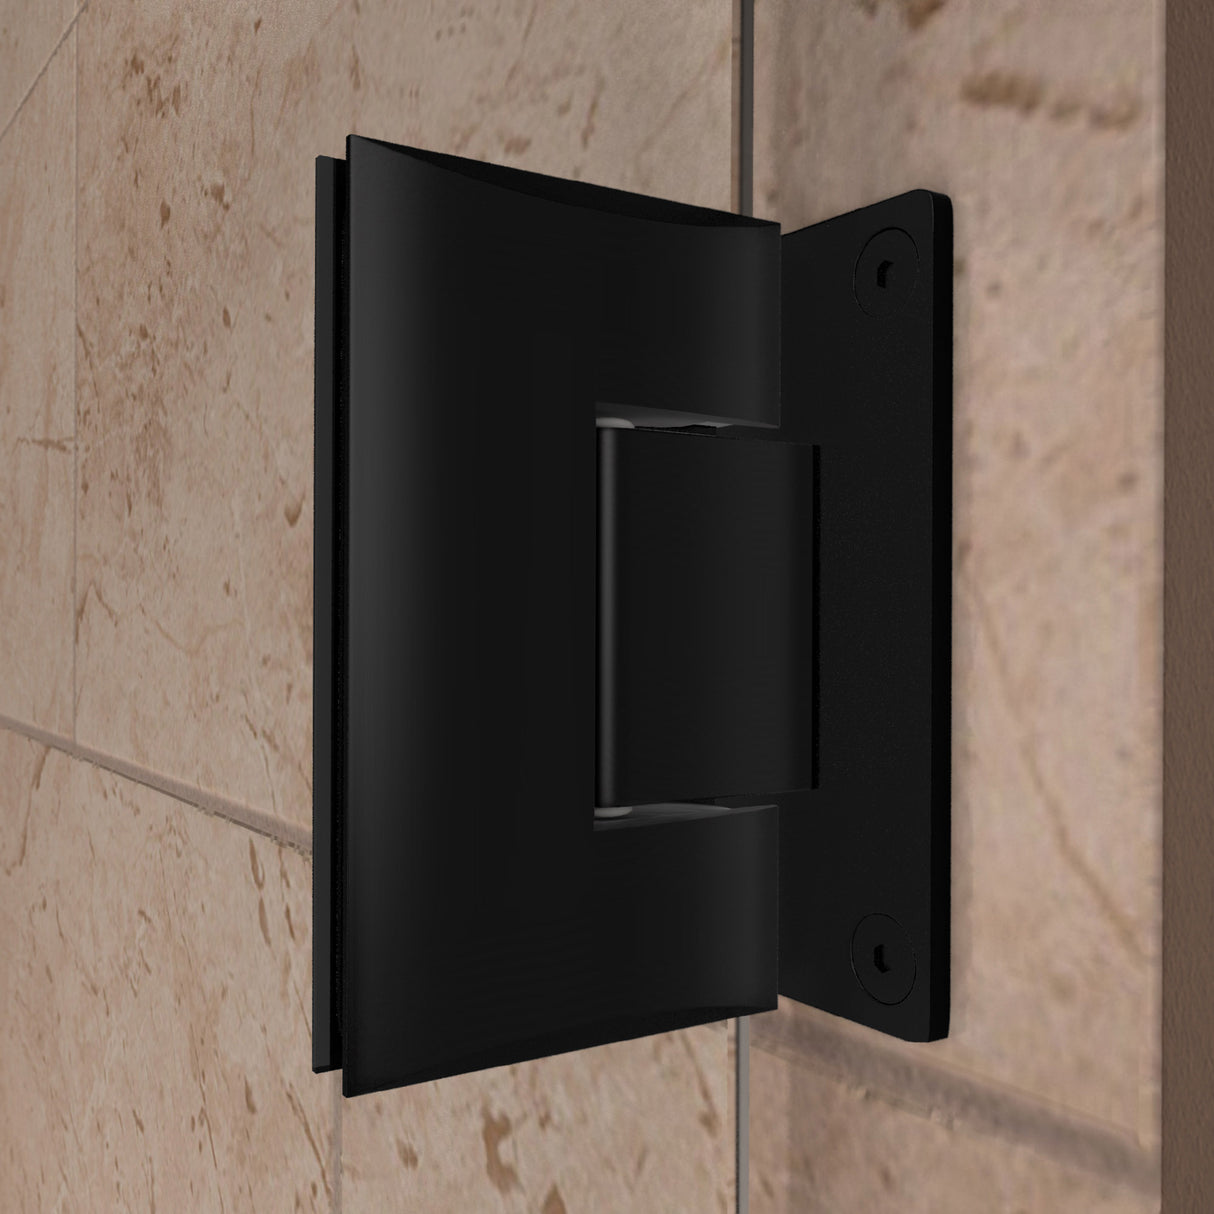 DreamLine Unidoor Toulon 34 in. D x 58 in. W x 72 in. H Frameless Hinged Shower Enclosure in Satin Black